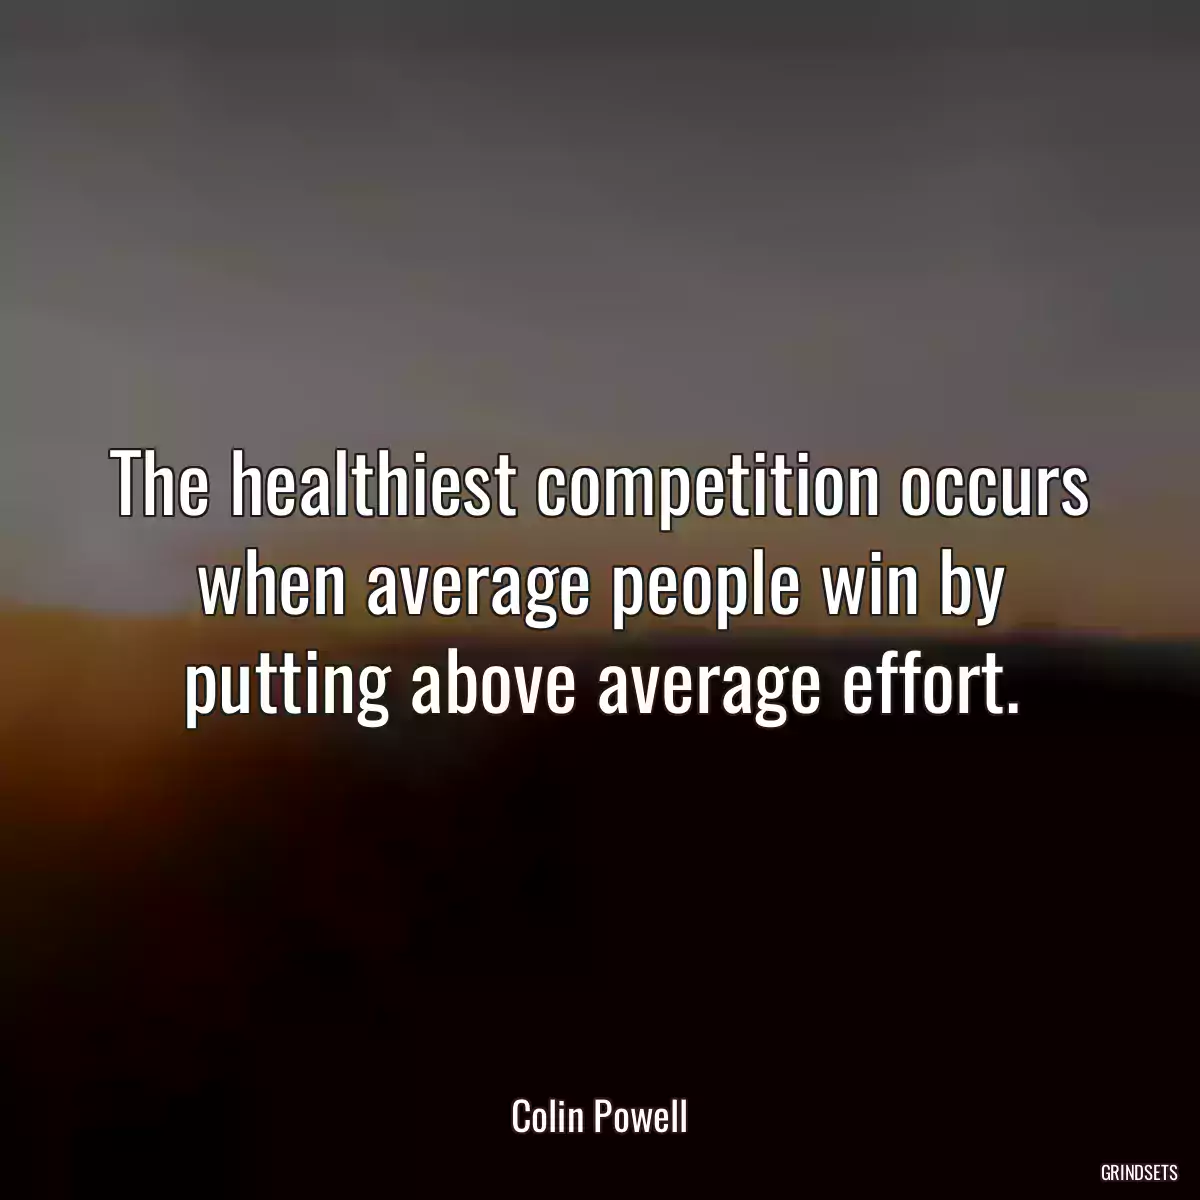 The healthiest competition occurs when average people win by putting above average effort.